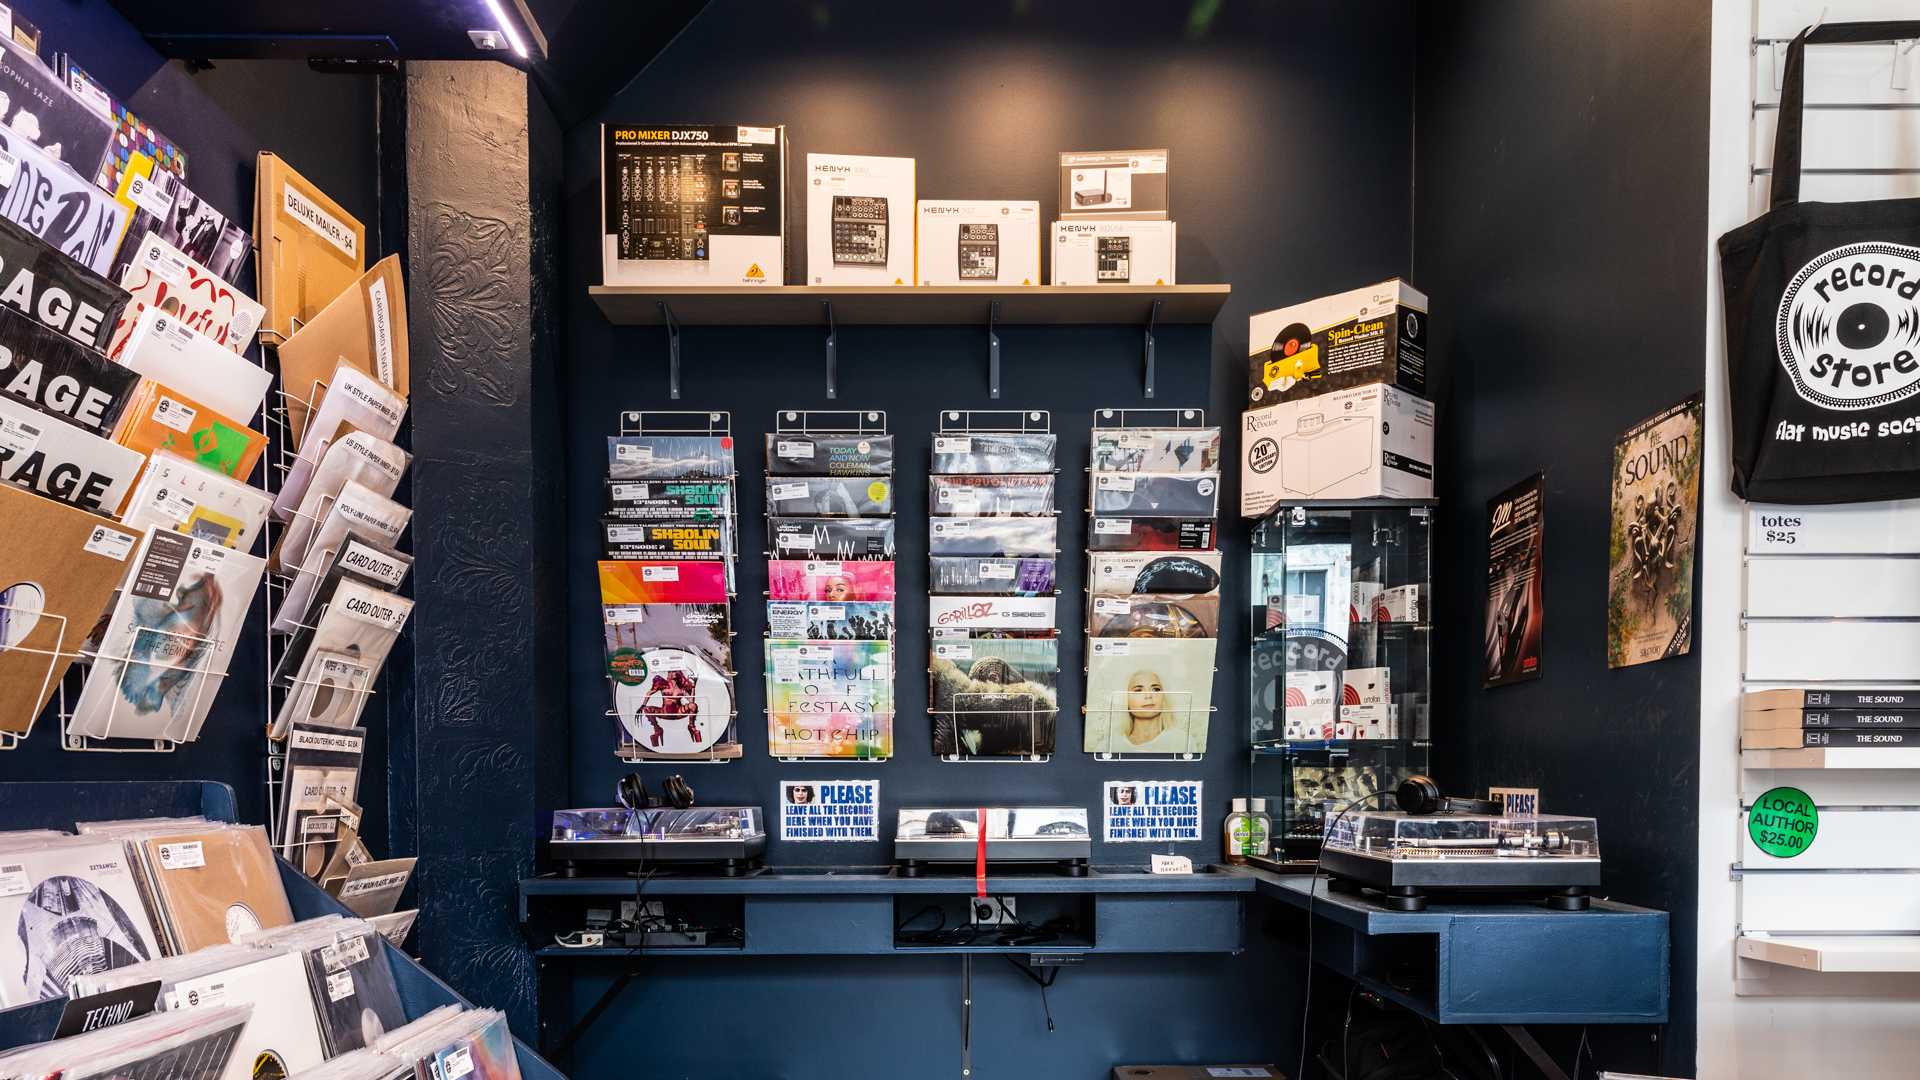 The Record Store